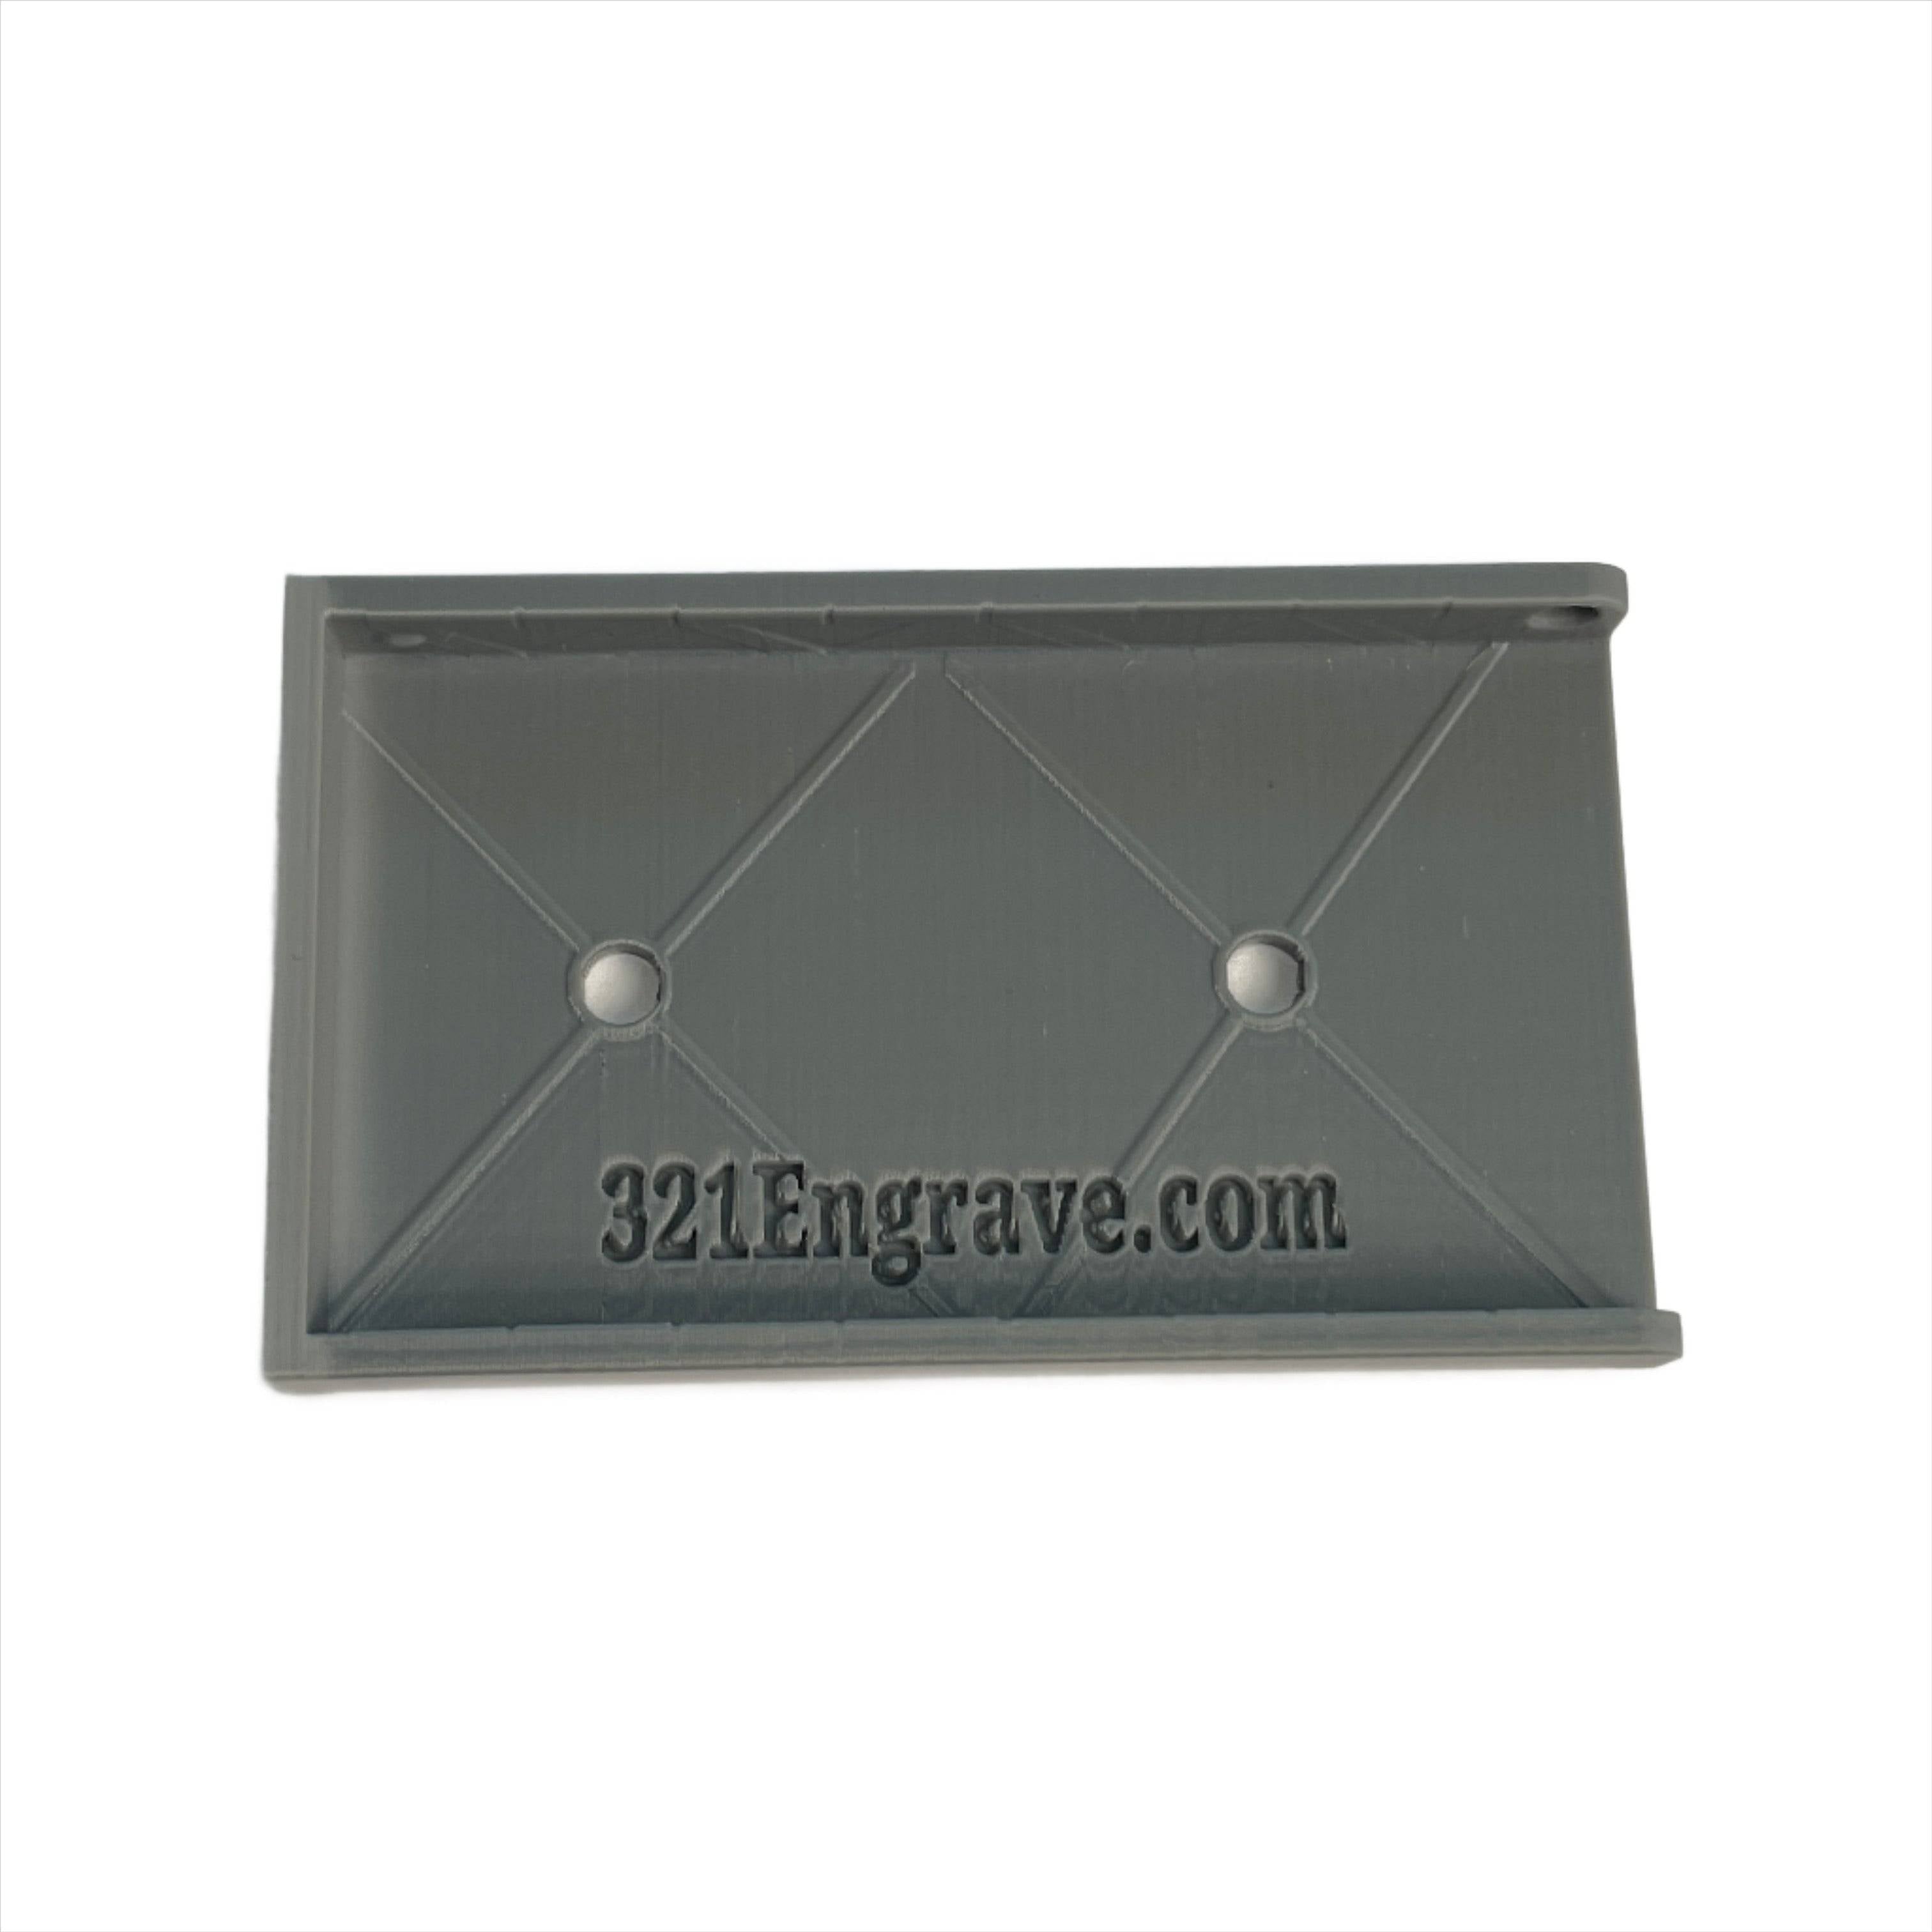 Use this gray base plate to match or offset your mailbox flag for brick or stone mailboxes.